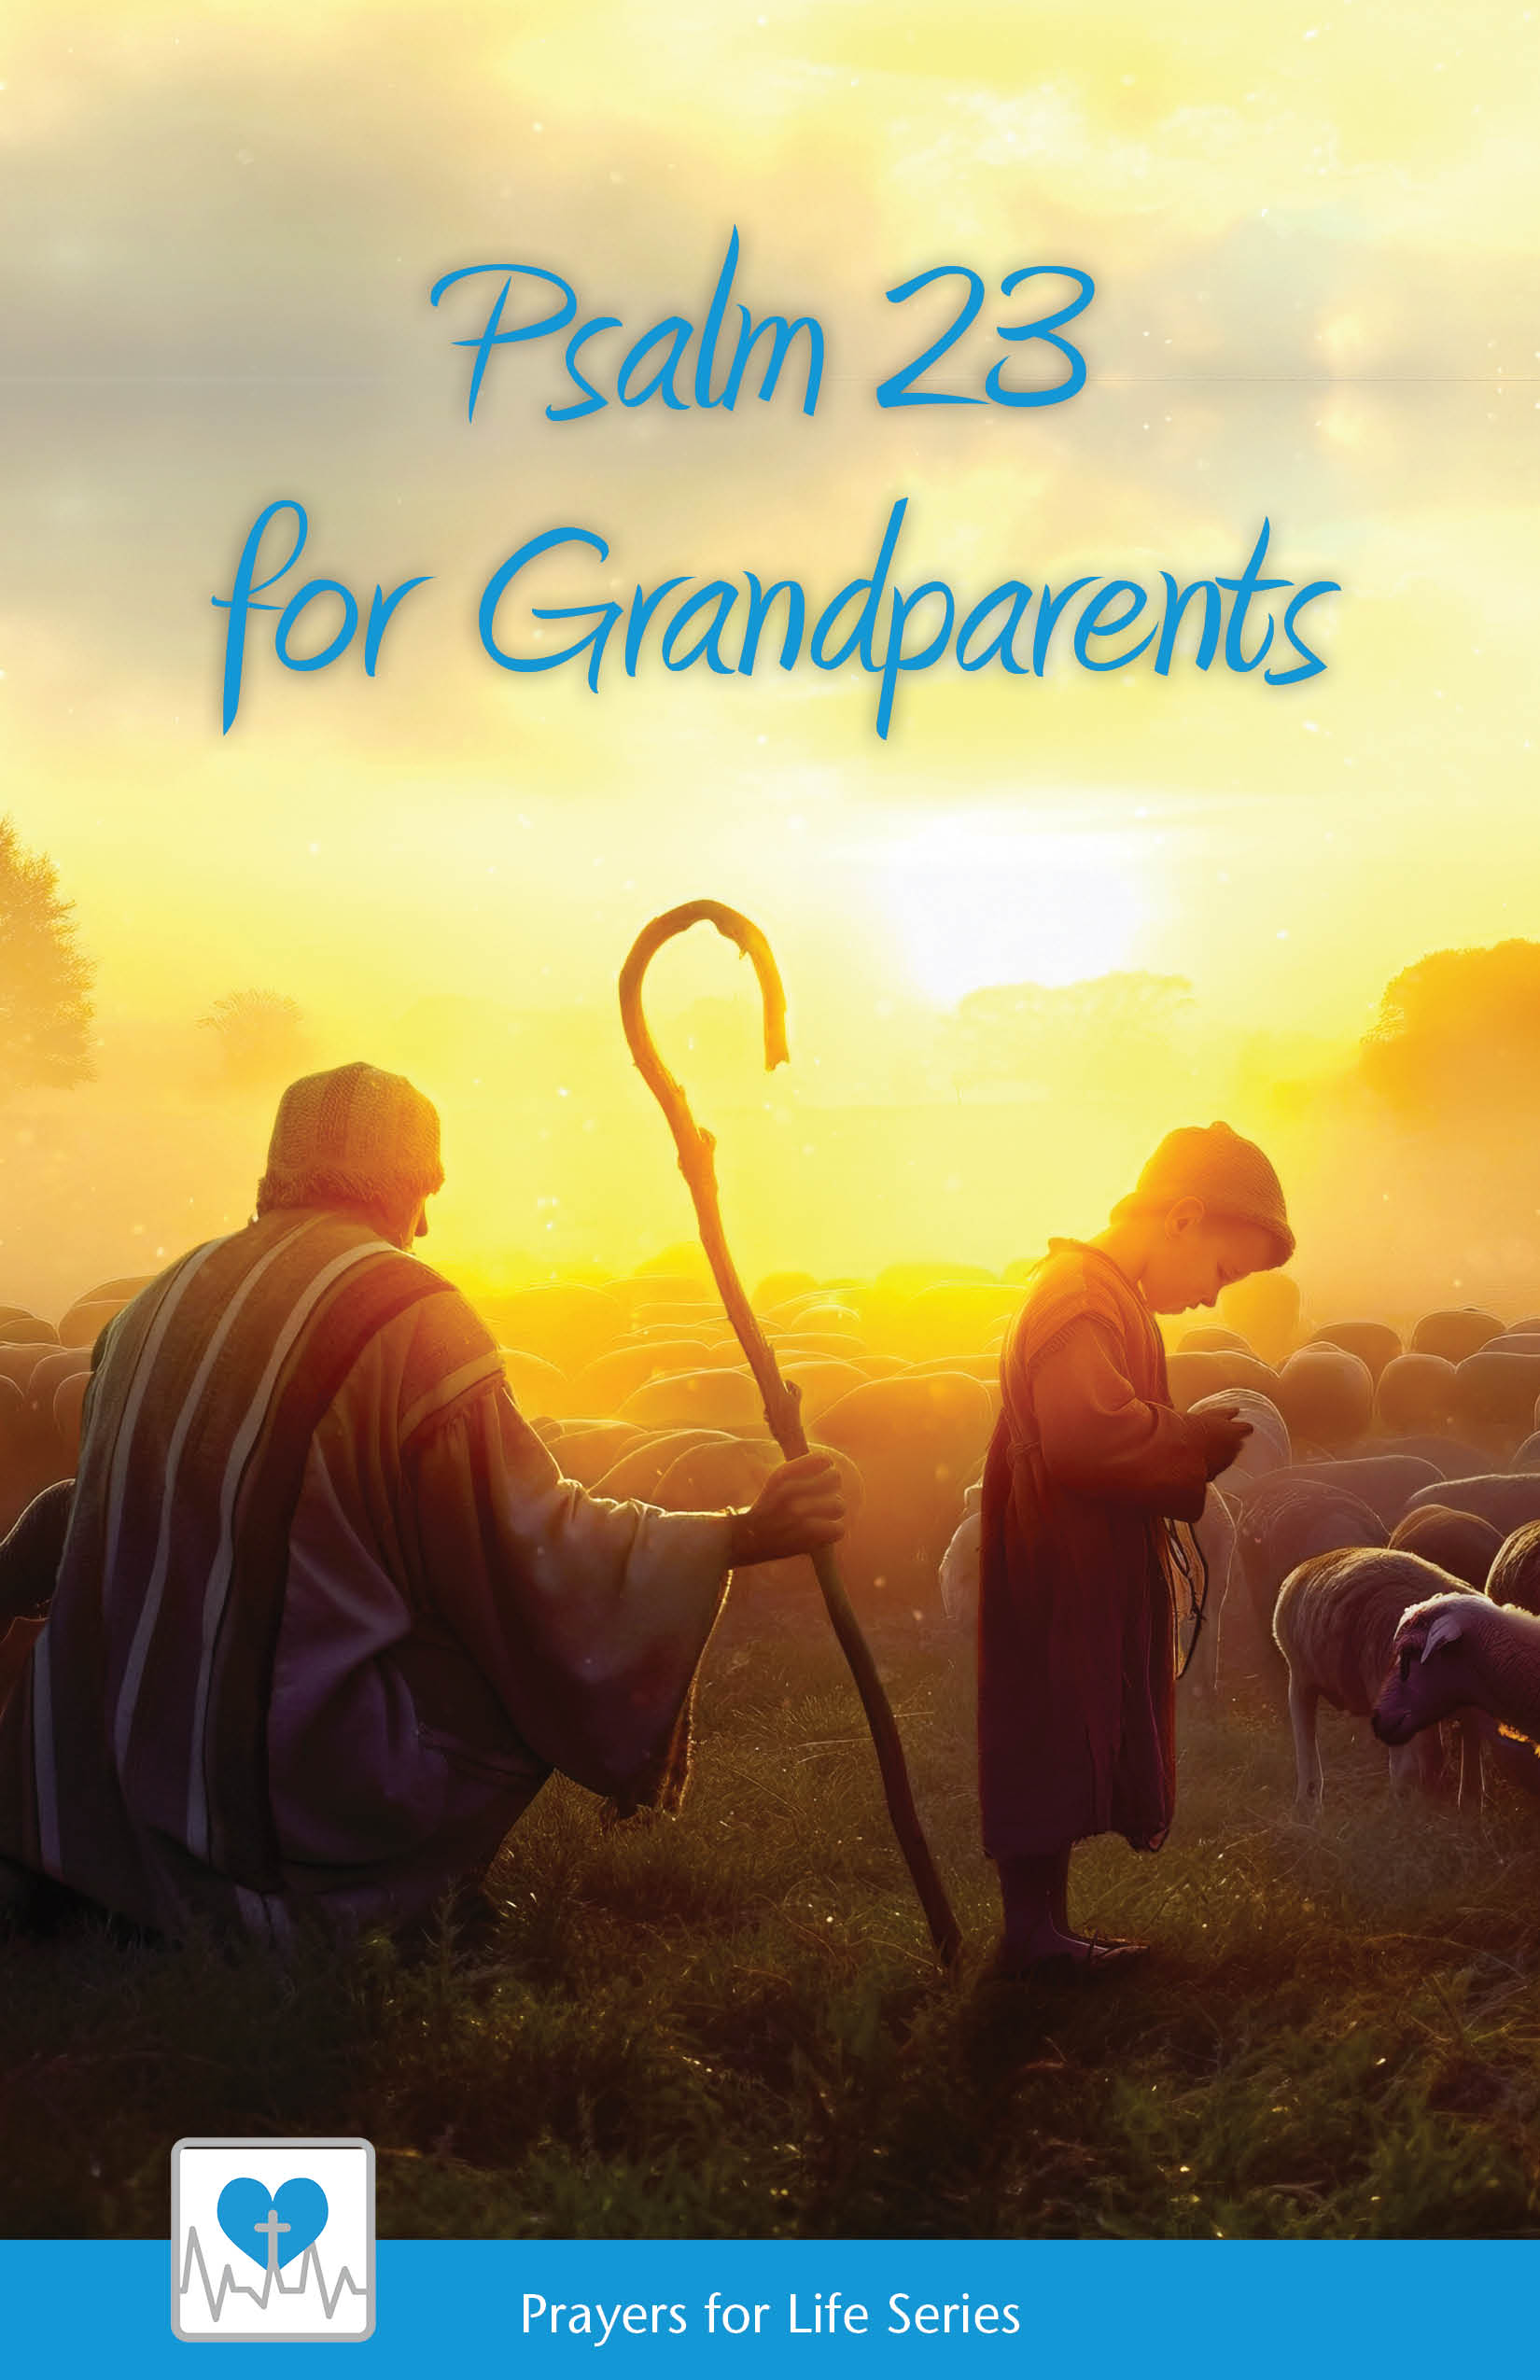 Psalm 23 for Grandparents